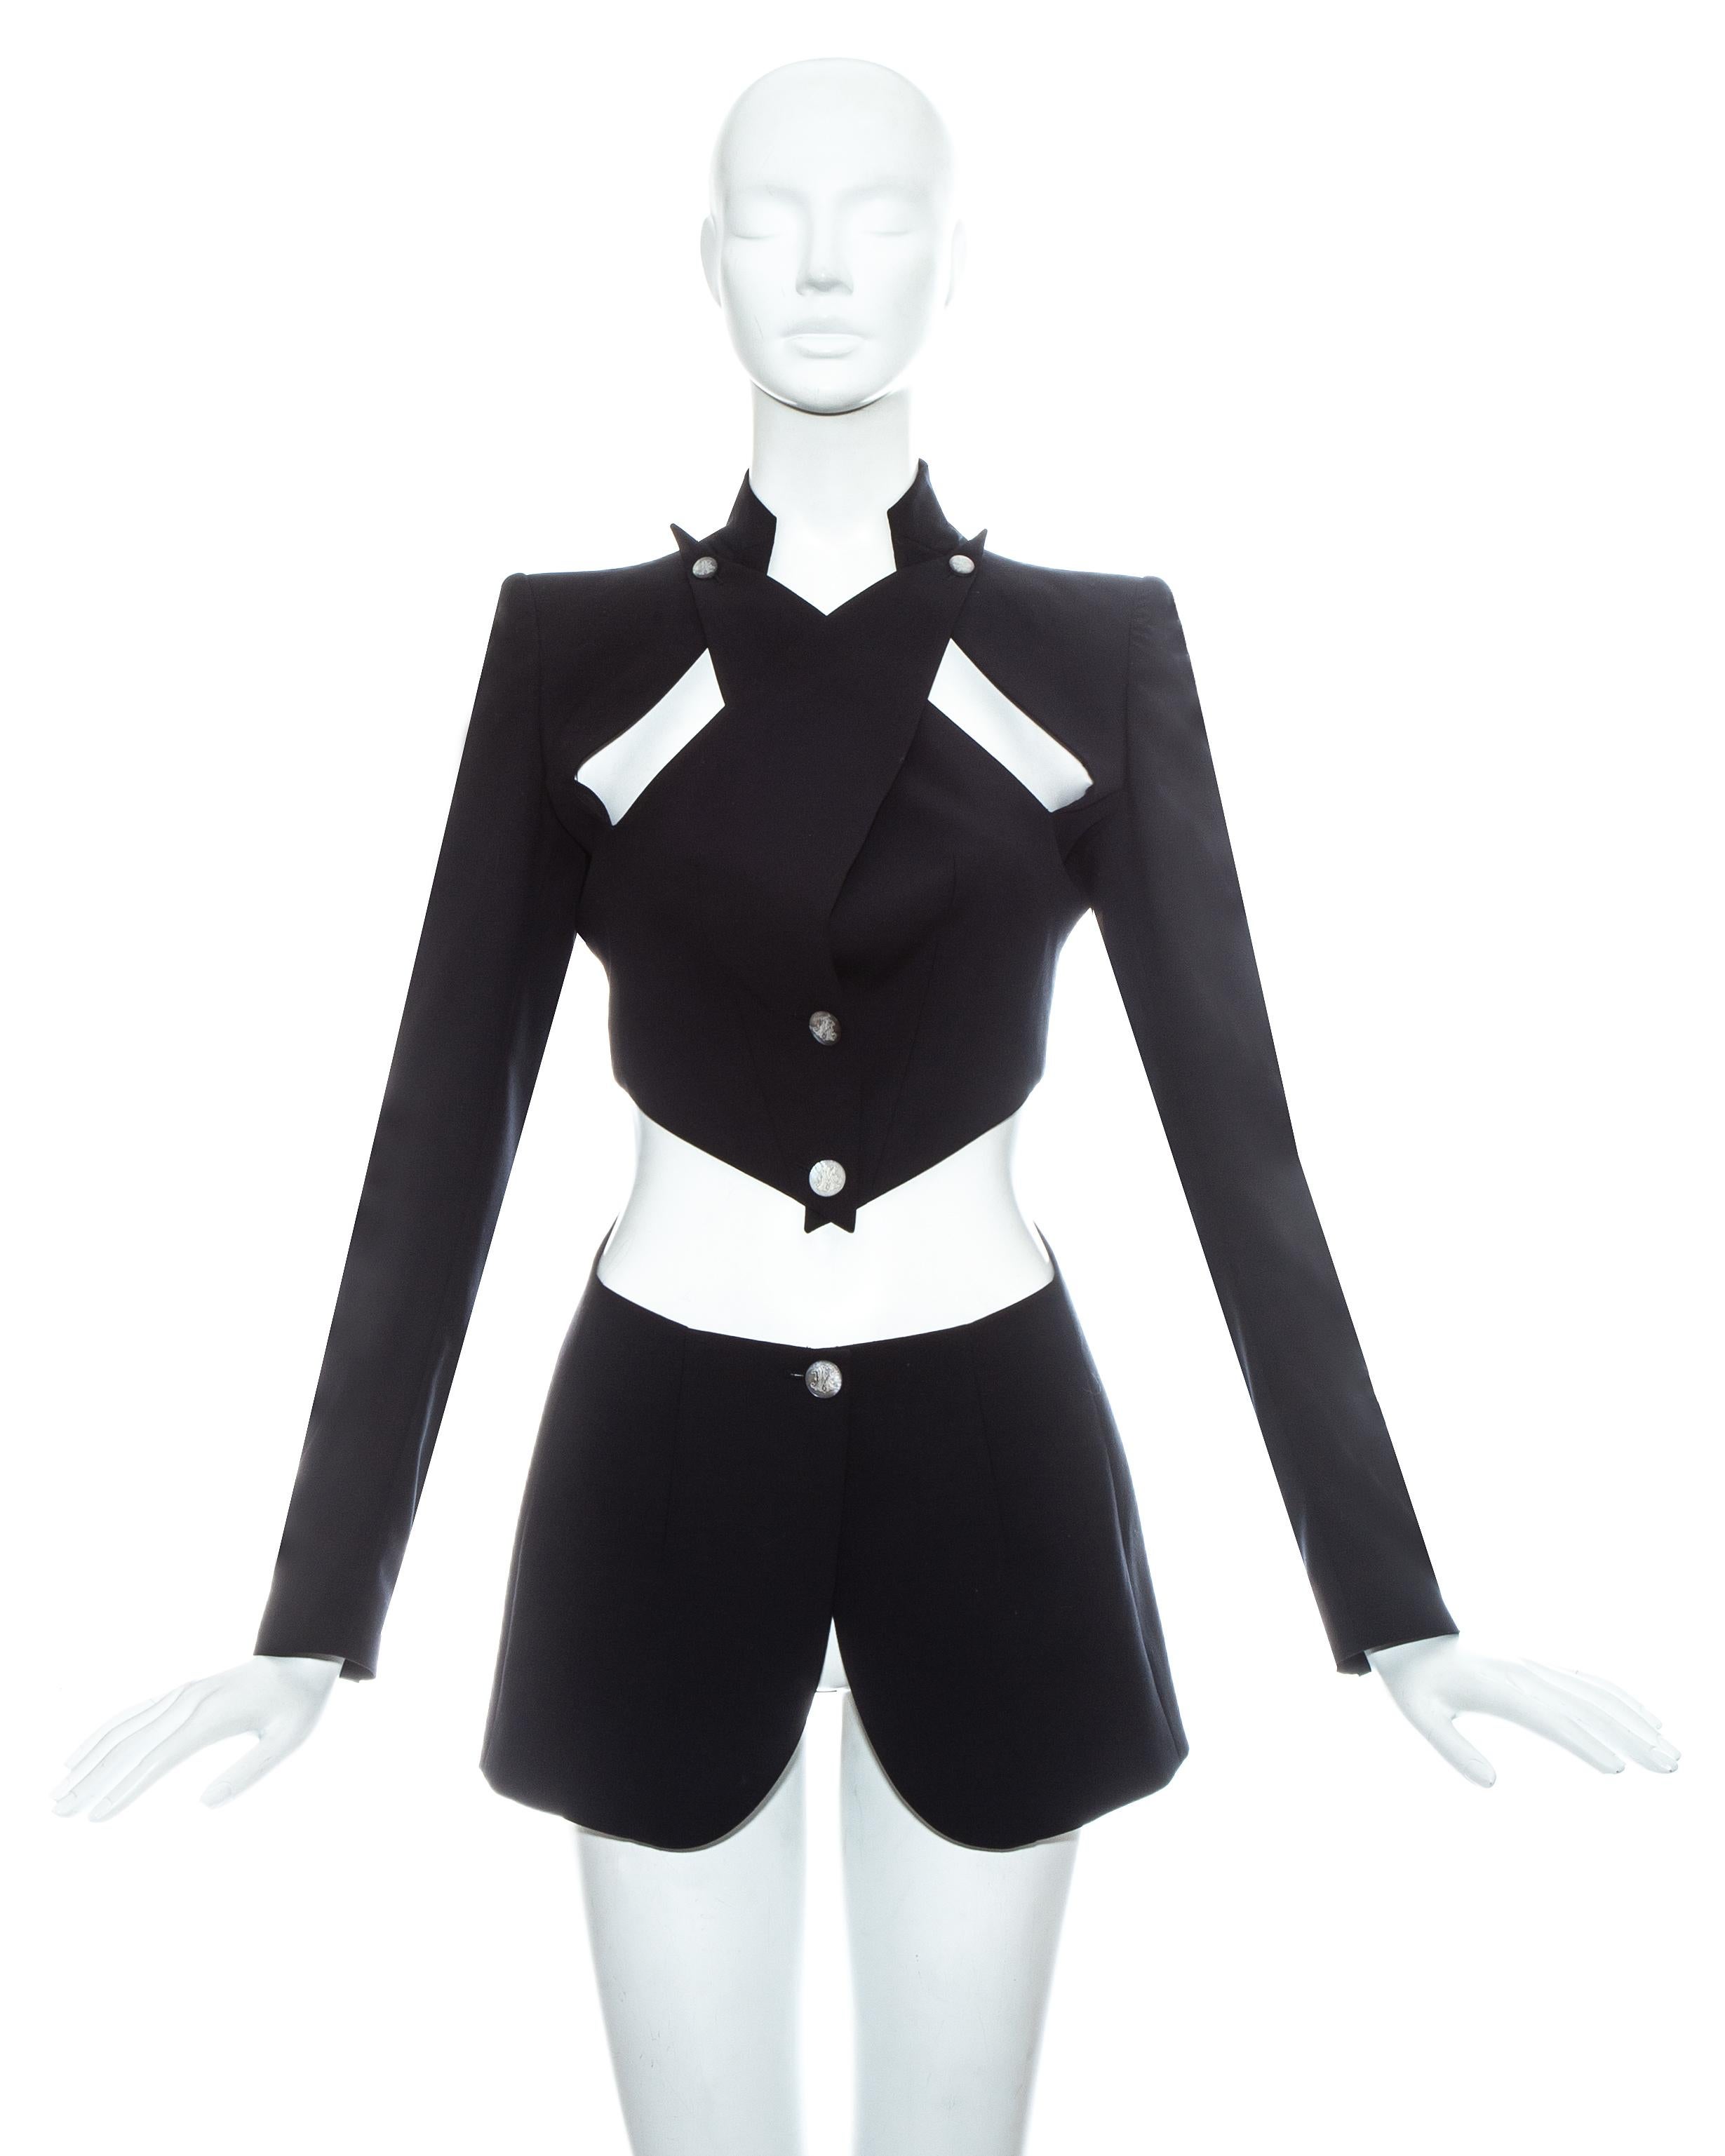 Alexander McQueen; black wool blazer jacket. Exaggerated lapels cross over and fasten on the shoulder line and cut out on the midriff.   

Spring-Summer 1999